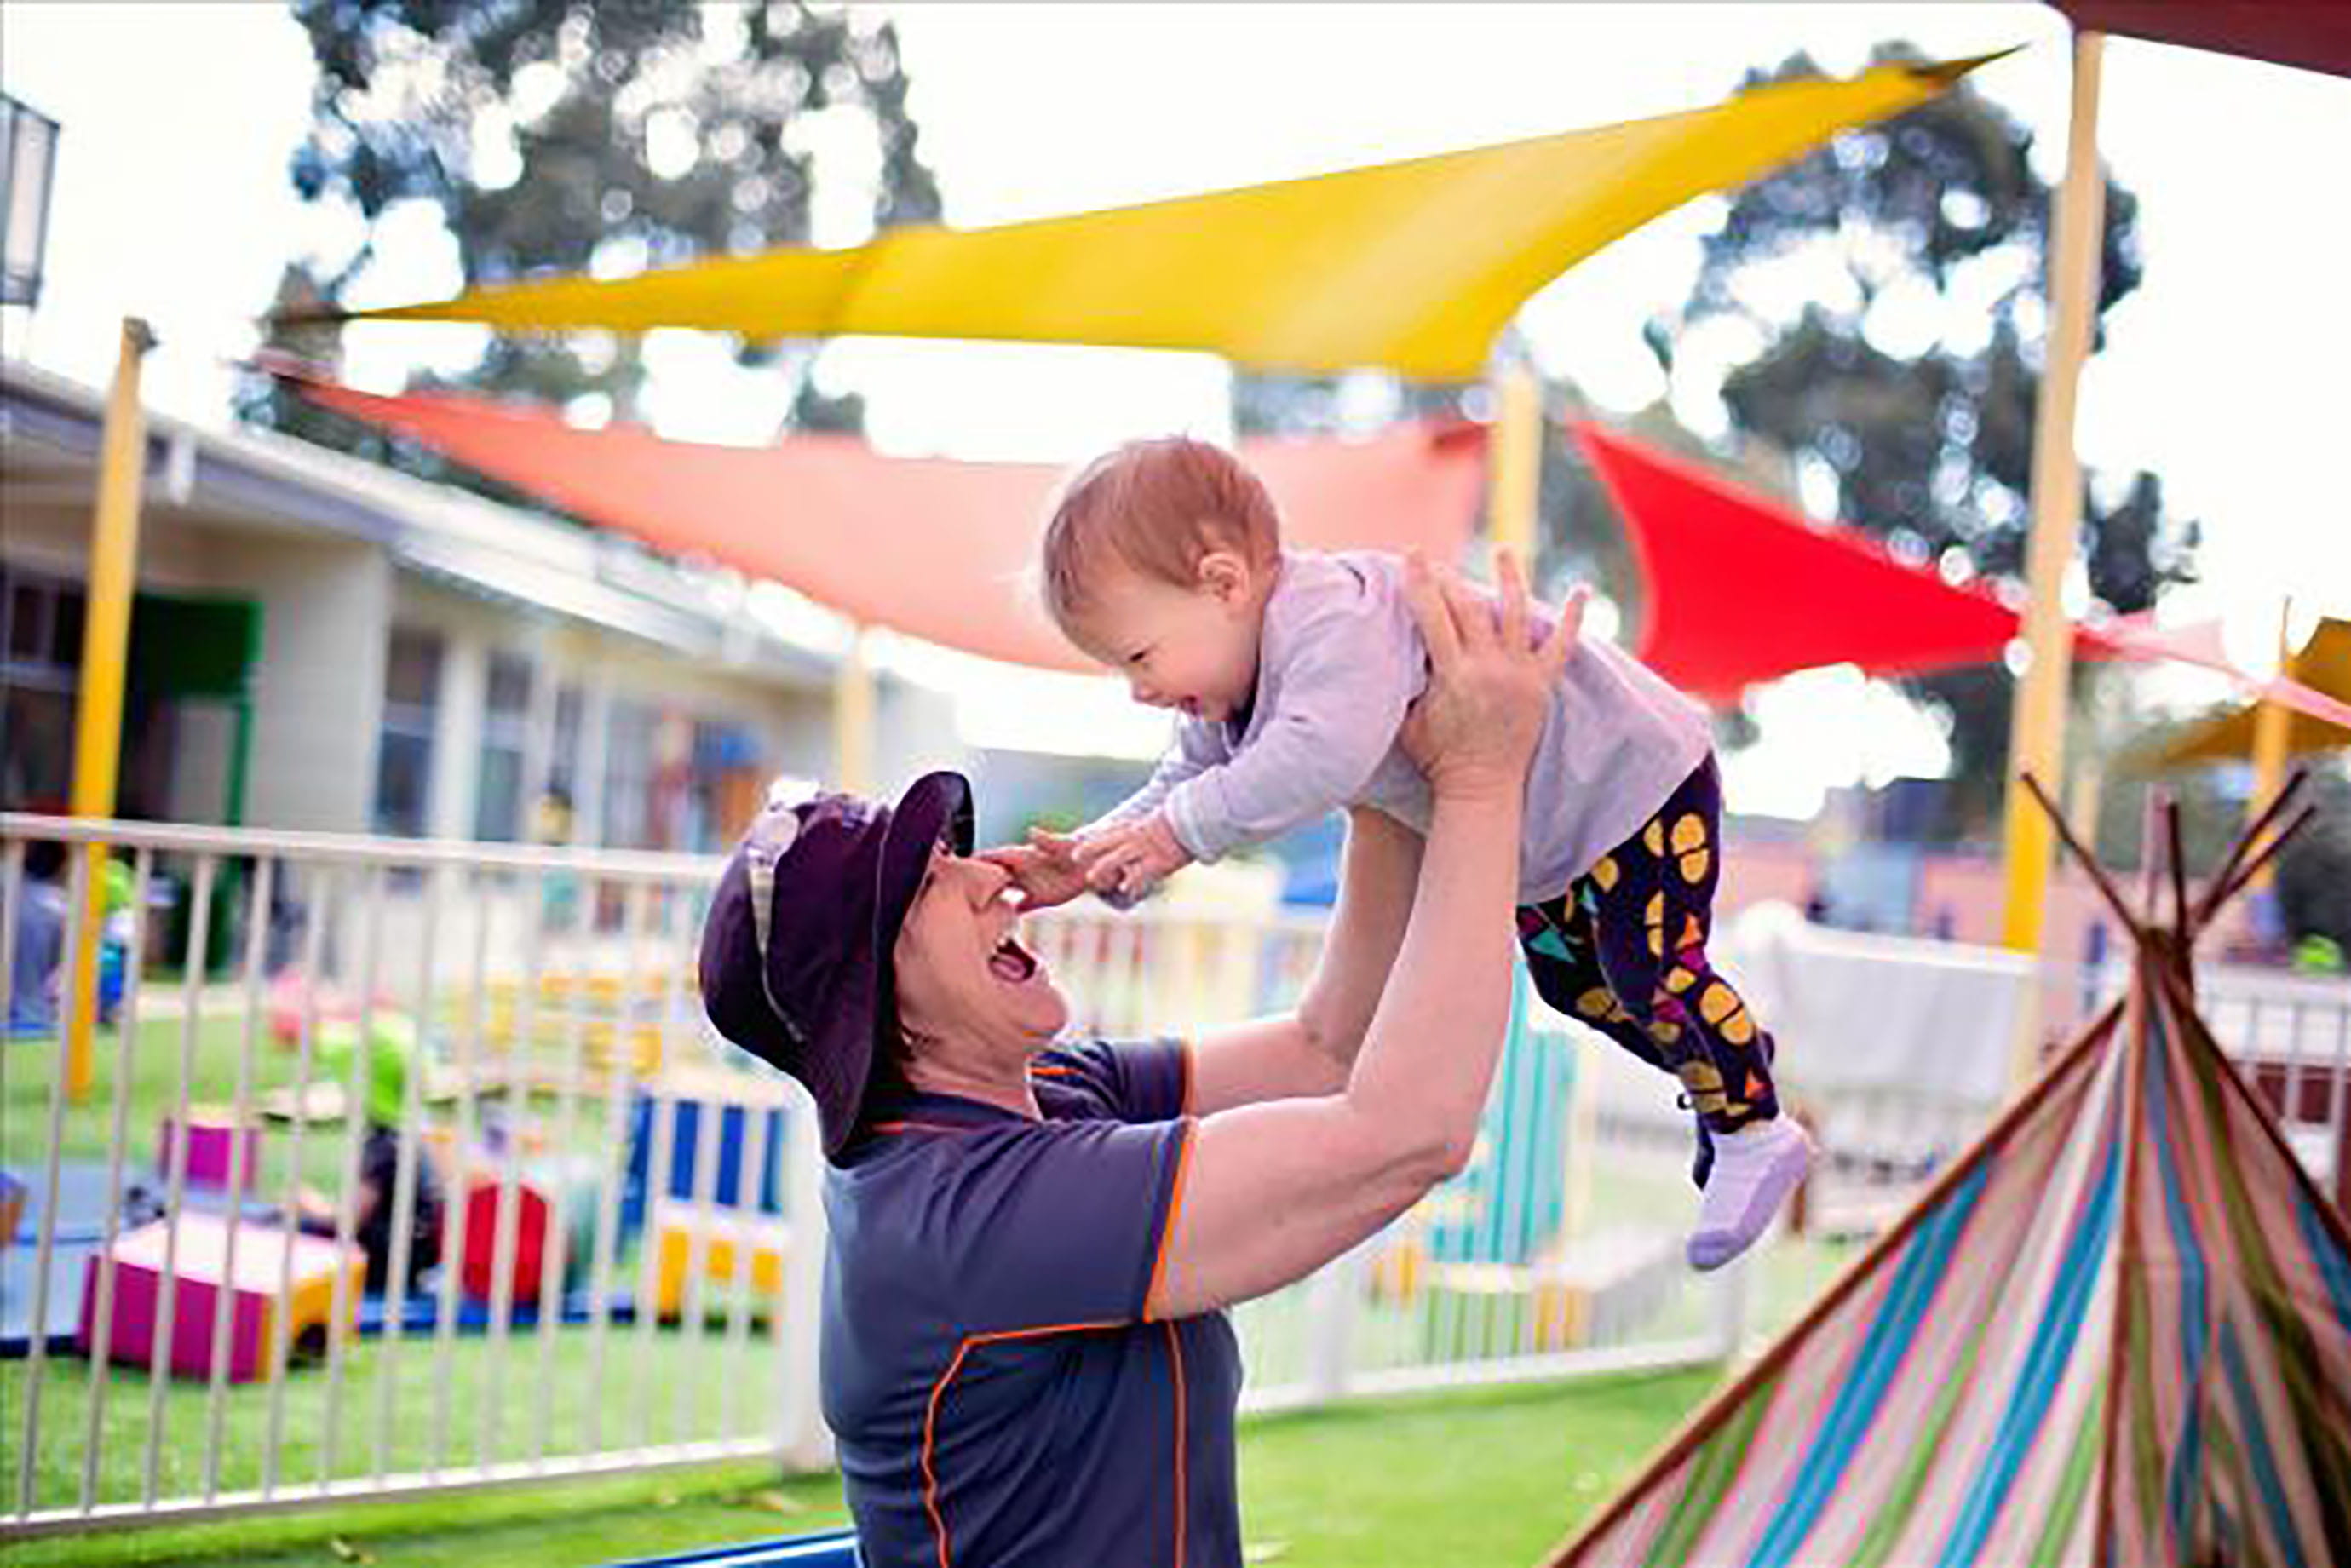 Bendigo child care educator playing with a baby